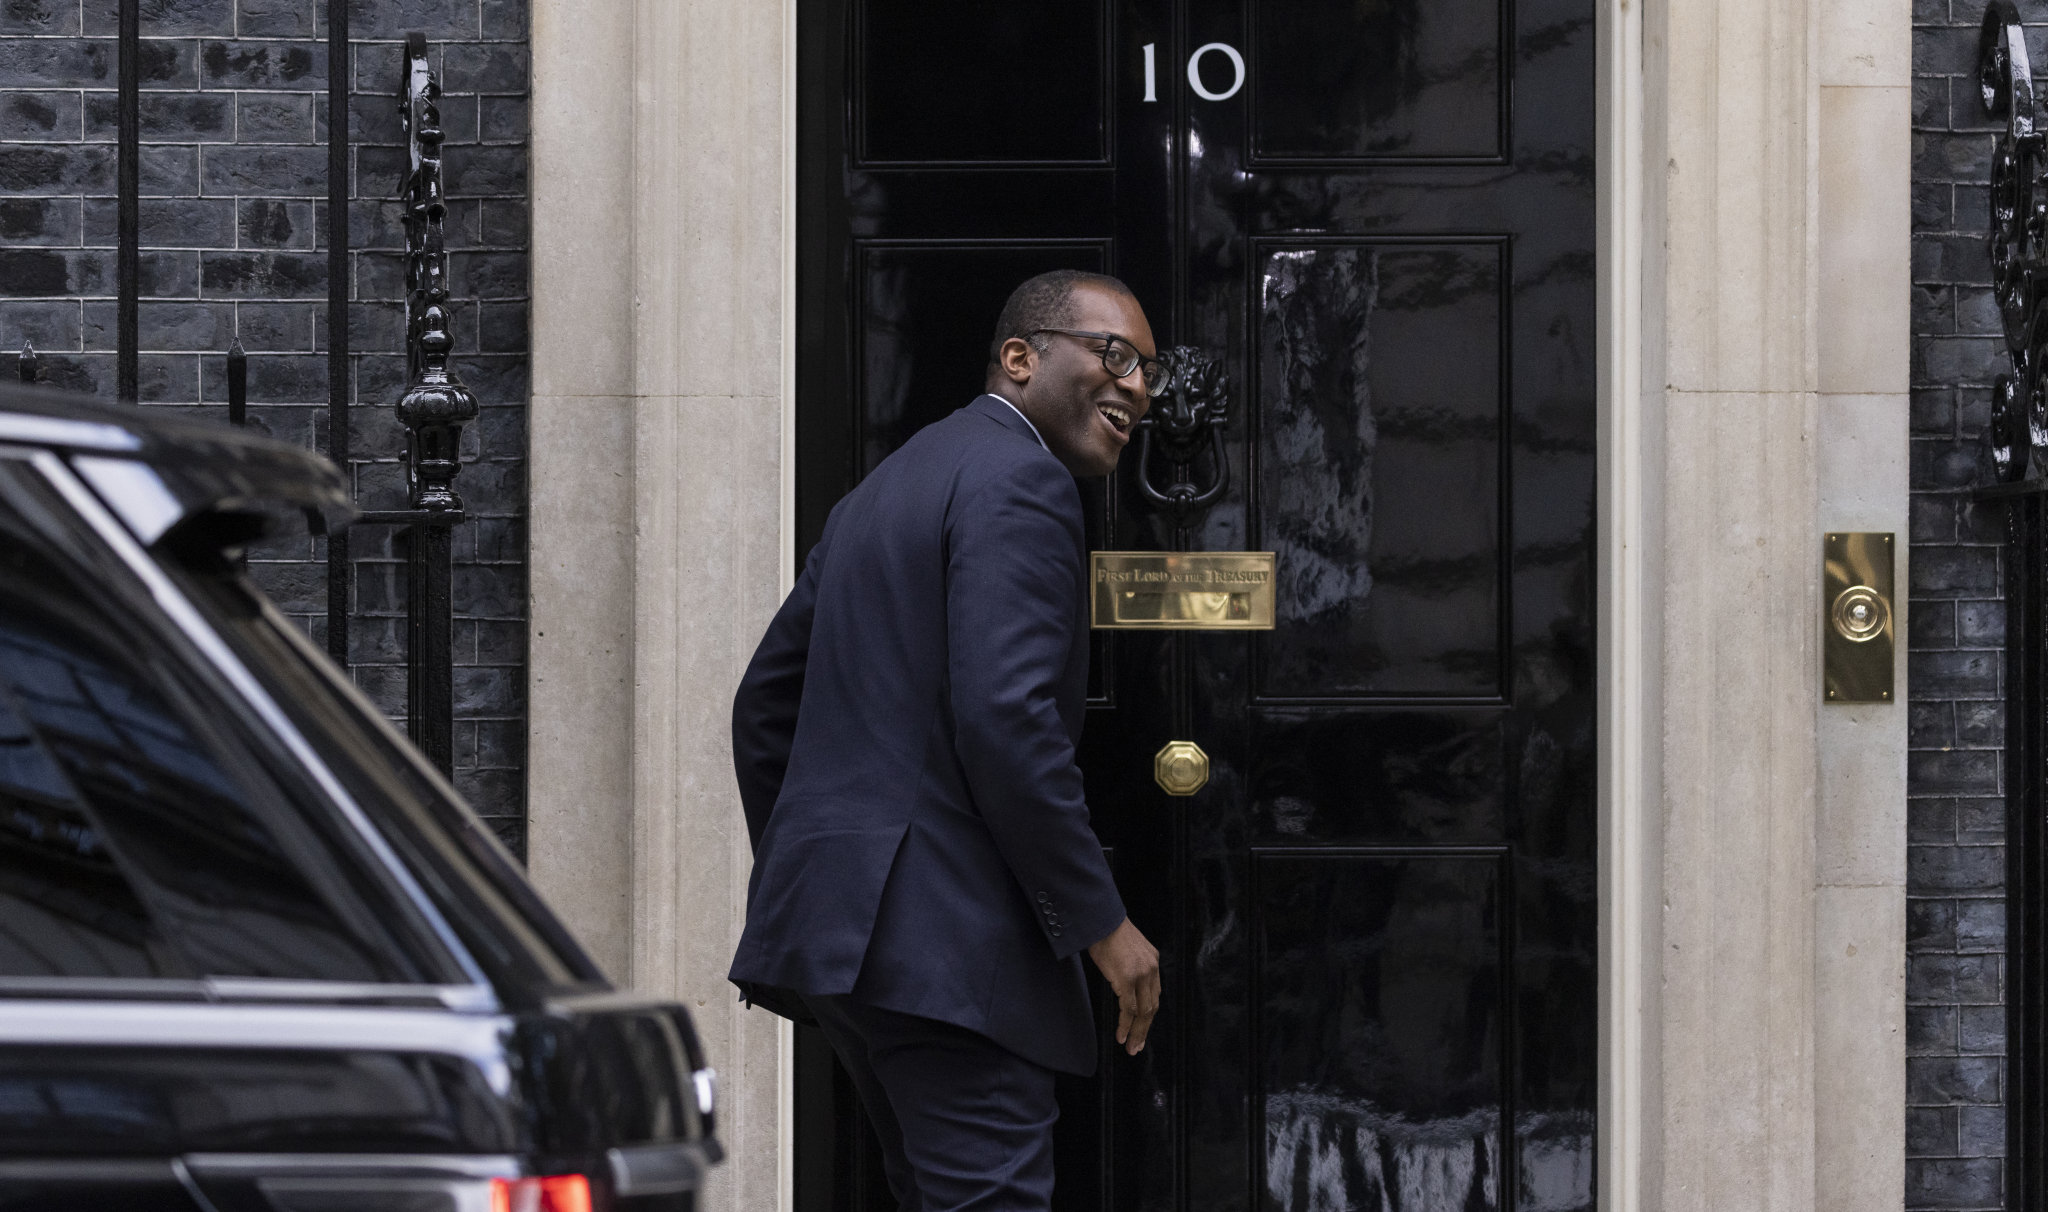 Business secretary Kwasi Kwarteng was funded by Le Cercle in 2019. (Photo: Dan Kitwood / Getty)